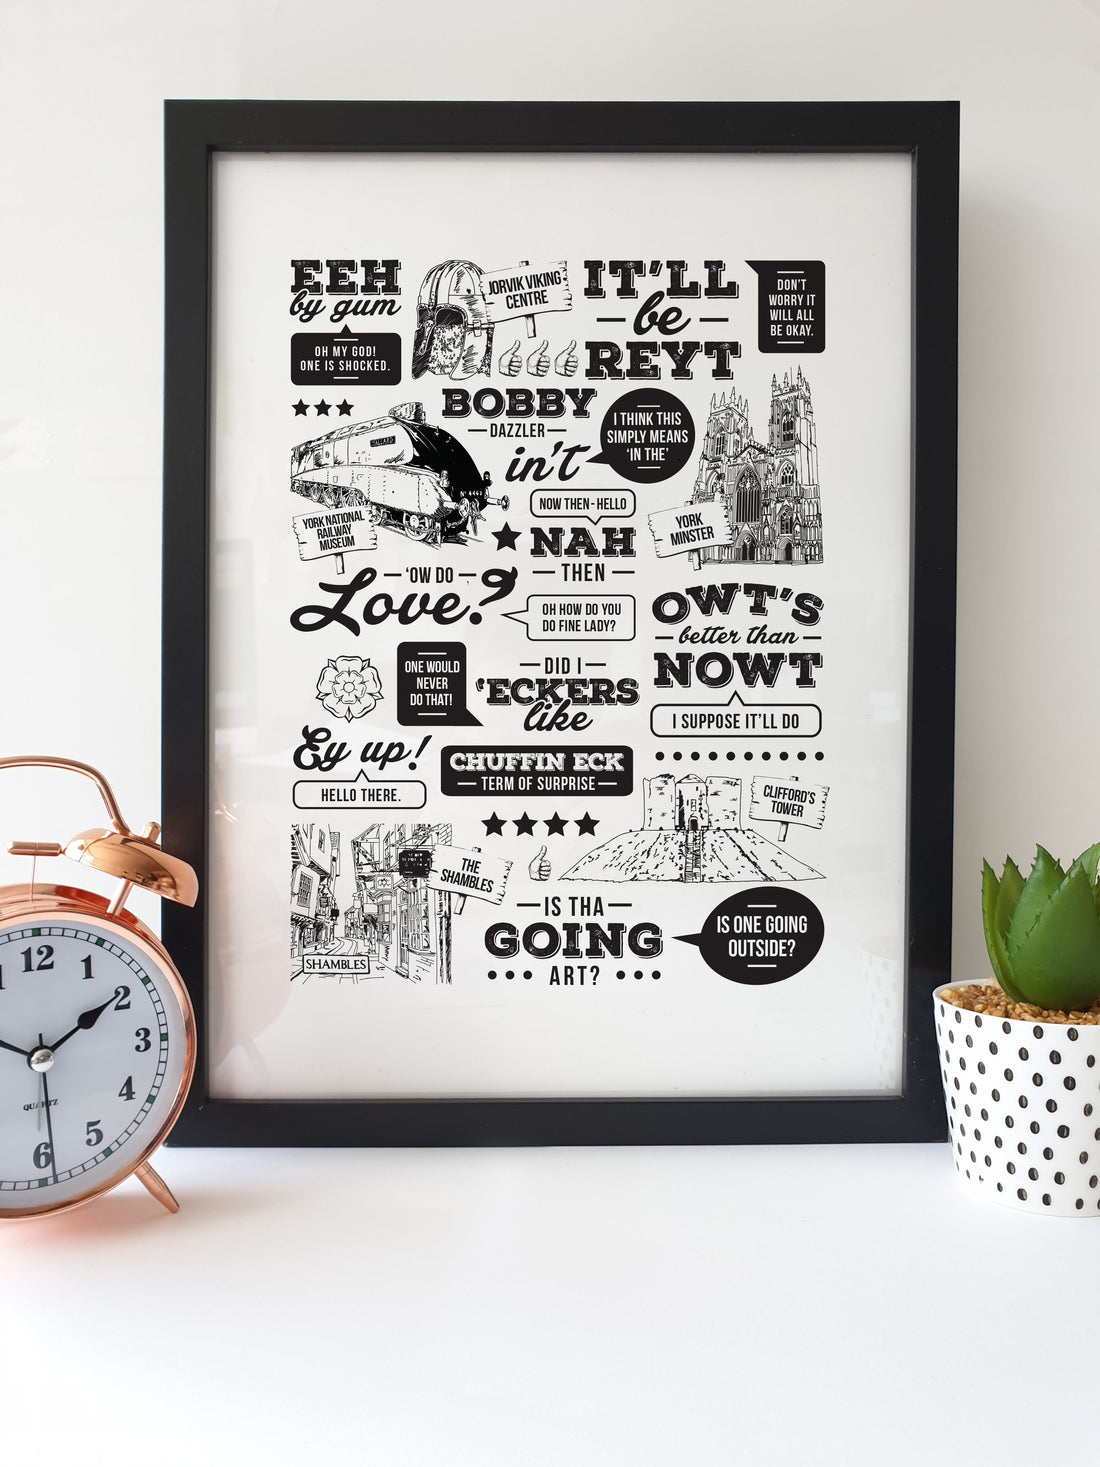 High quality hand drawn illustrated print  Yorkshire born and bred? Want a little reminder of 'home'? We've designed this unique print to translate some popular Yorkshire phrases, Includes illustrations of popular Yorkshire landmarks.